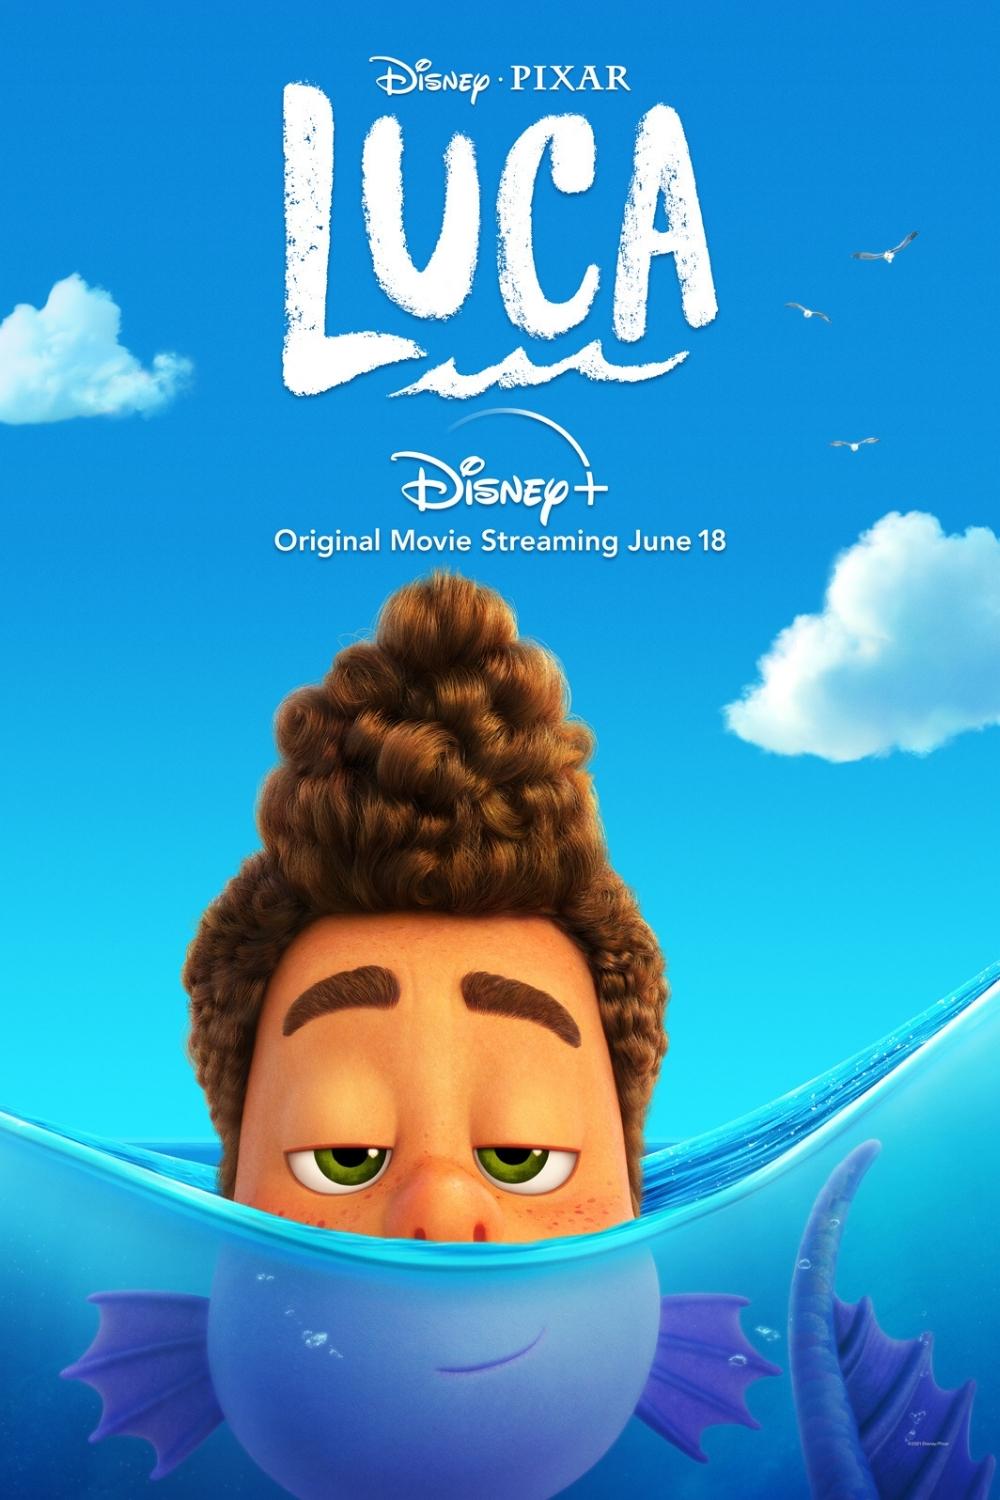 Promotional poster for Disney & Pixar's Luca featuring the character Alberto.